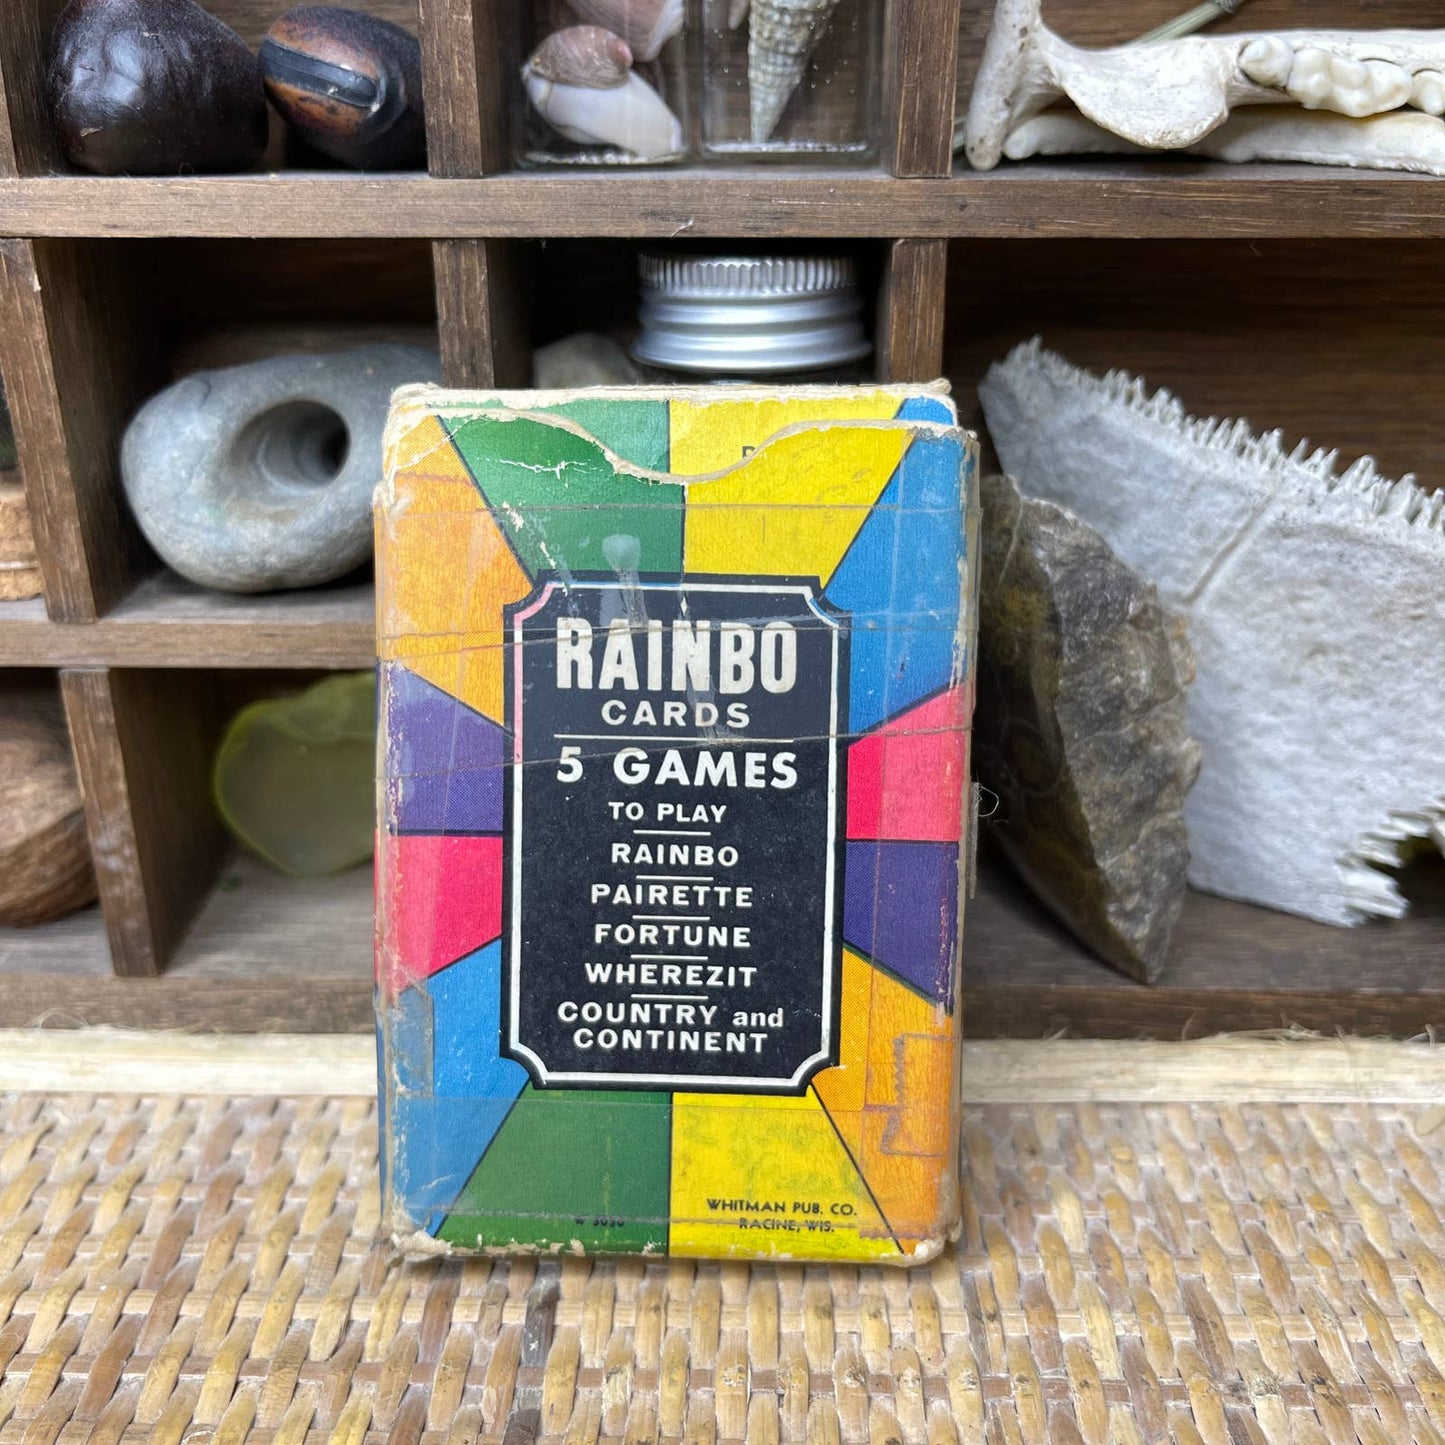 Vintage 1930s Rainbo Cards Deck with 5 games Including Fortune Telling